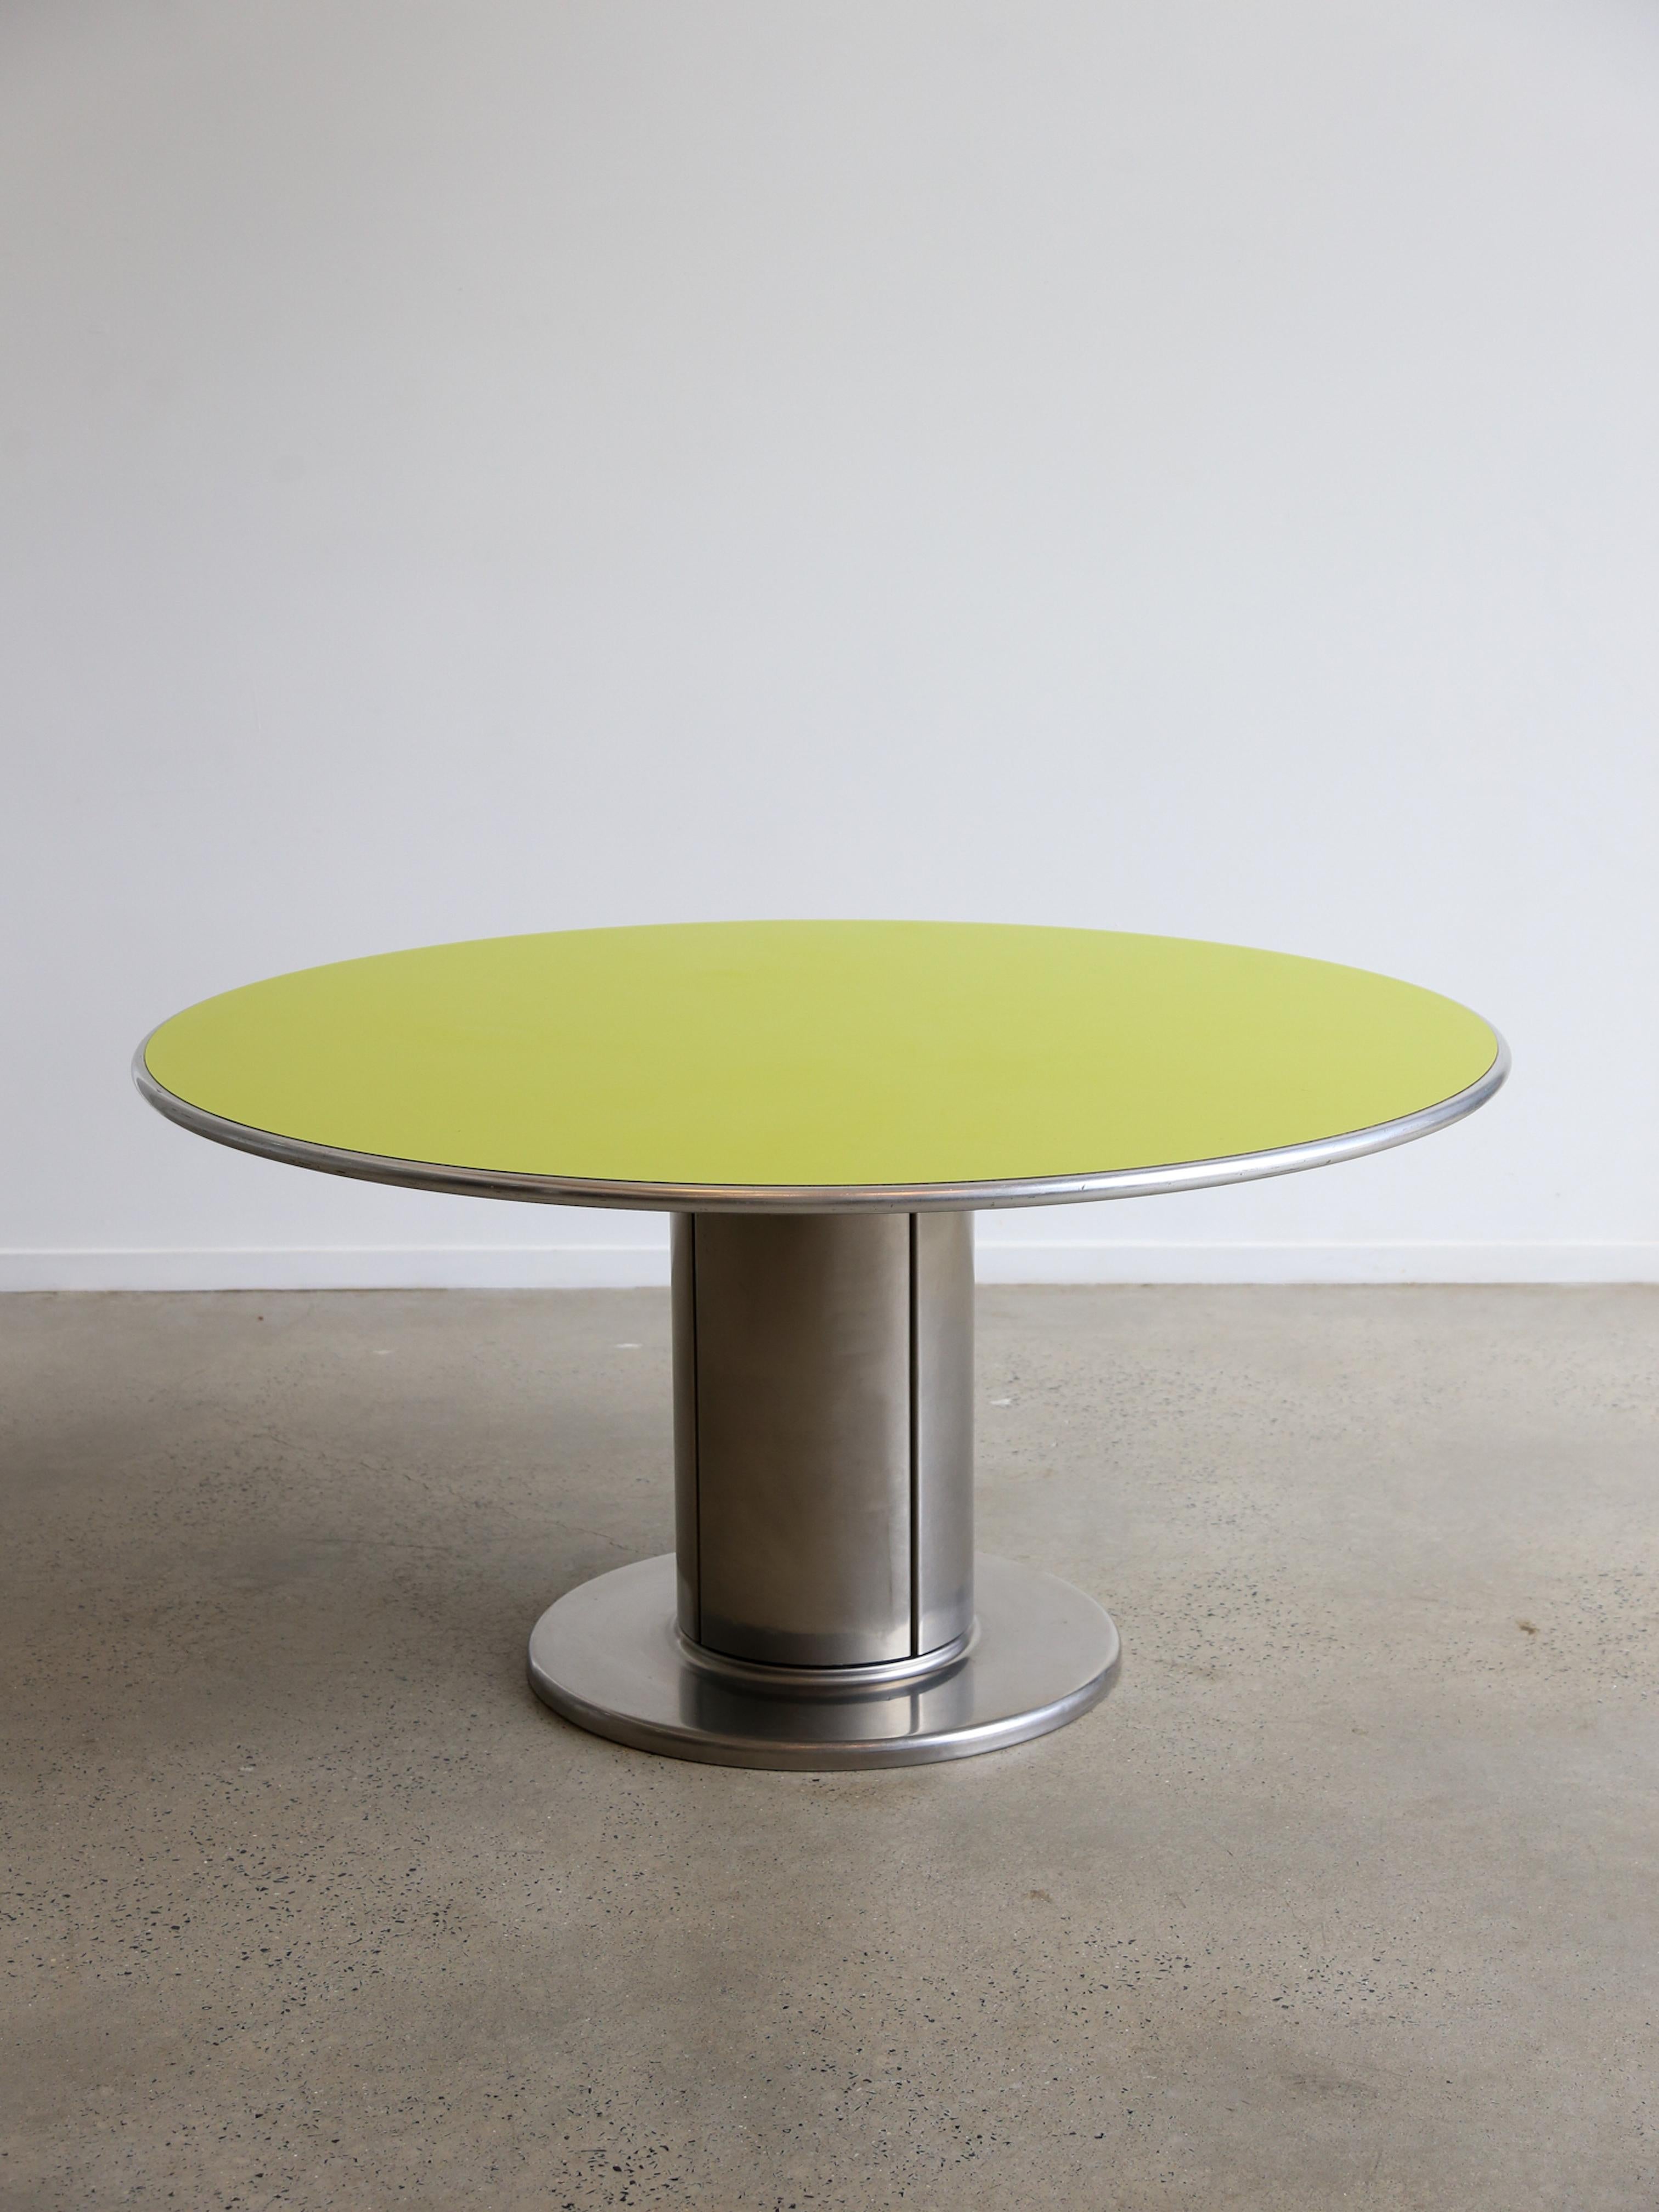 An eye-catching dining table, model “Cidonio”, designed by Antonia Astori, manufactured by Cidue in Italy around 1960.

This modern table is a true statement piece in the decor! It has a thick cylinder shaped, chrome plated metal base on a flat